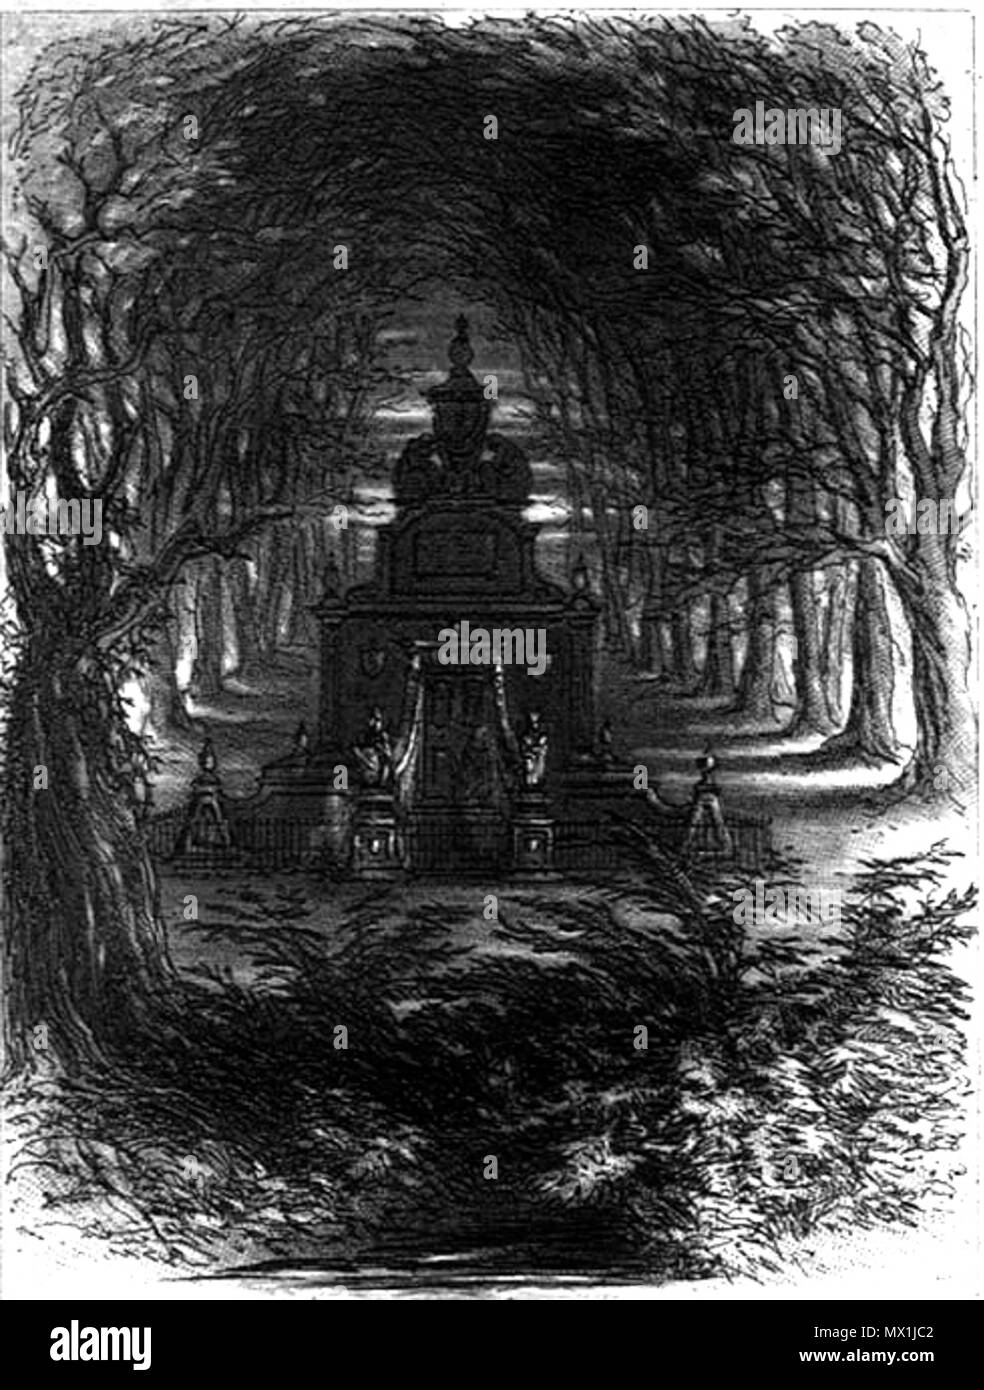 . English: The Mausoleum at Chesney Wold Phiz (Hablot K. Browne) 1853 Etching 5 3/16 x 3 7/16 inches on a page of 8 7/16 x 5 inches Facing p. 619 (ch. 66, 'Down in Lincolnshire') — the first page of the brief final chapter of Dickens's Bleak House . 6 February 2012, 15:13:18. Hablot Knight Browne (Phiz) 598 The Mausoleum at Chesney Wold Stock Photo